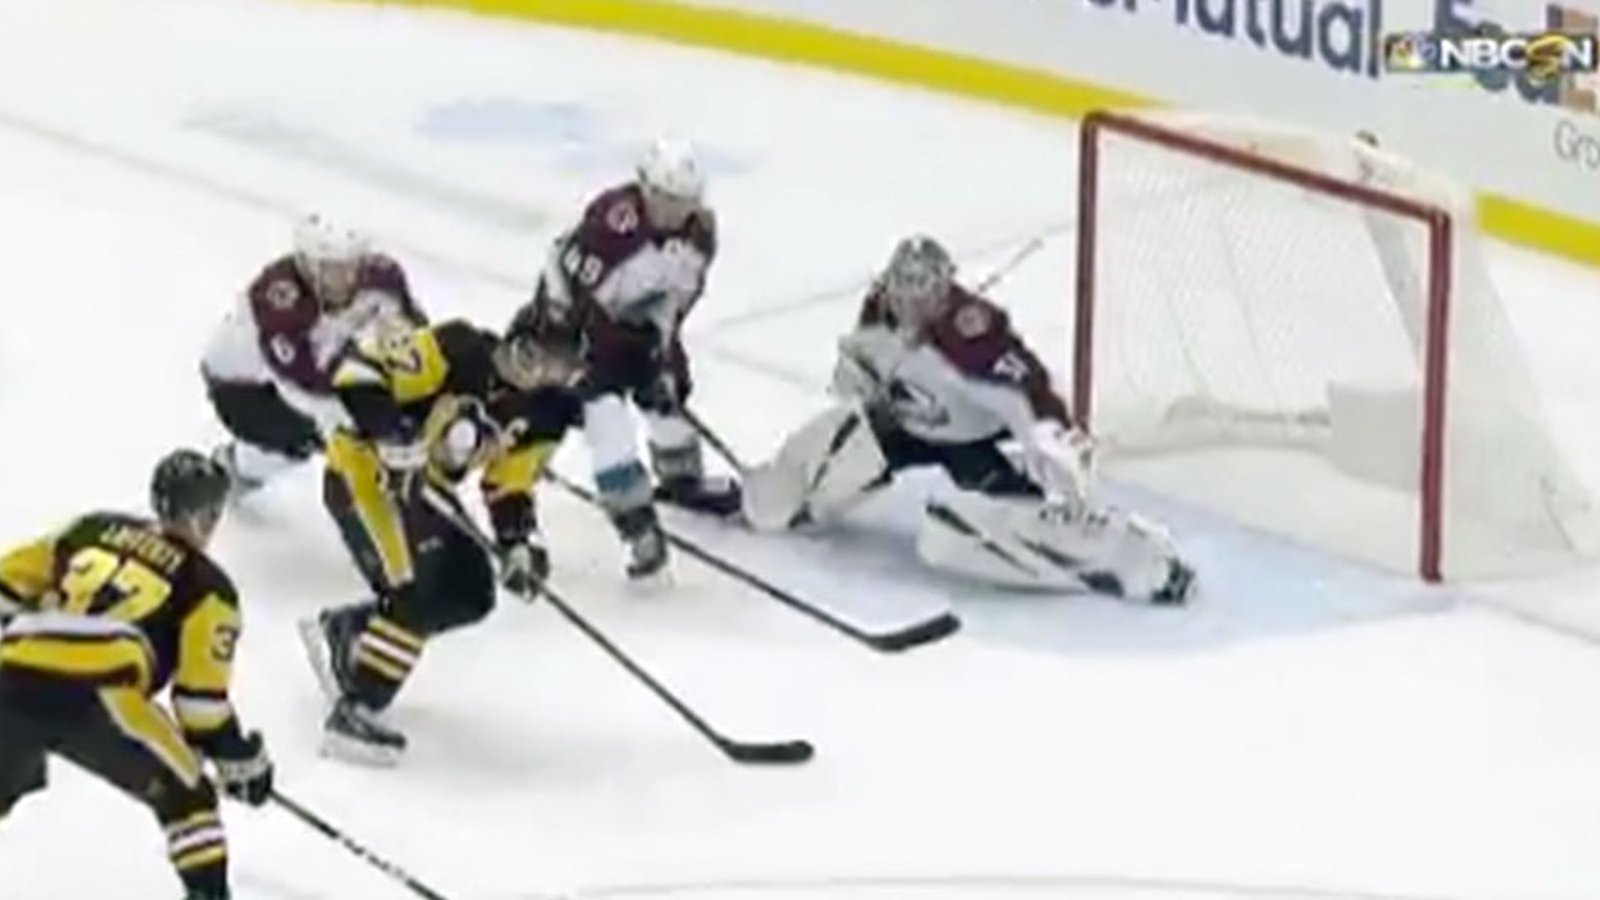 Crosby beats three Avs to score an early goal of the year candidate